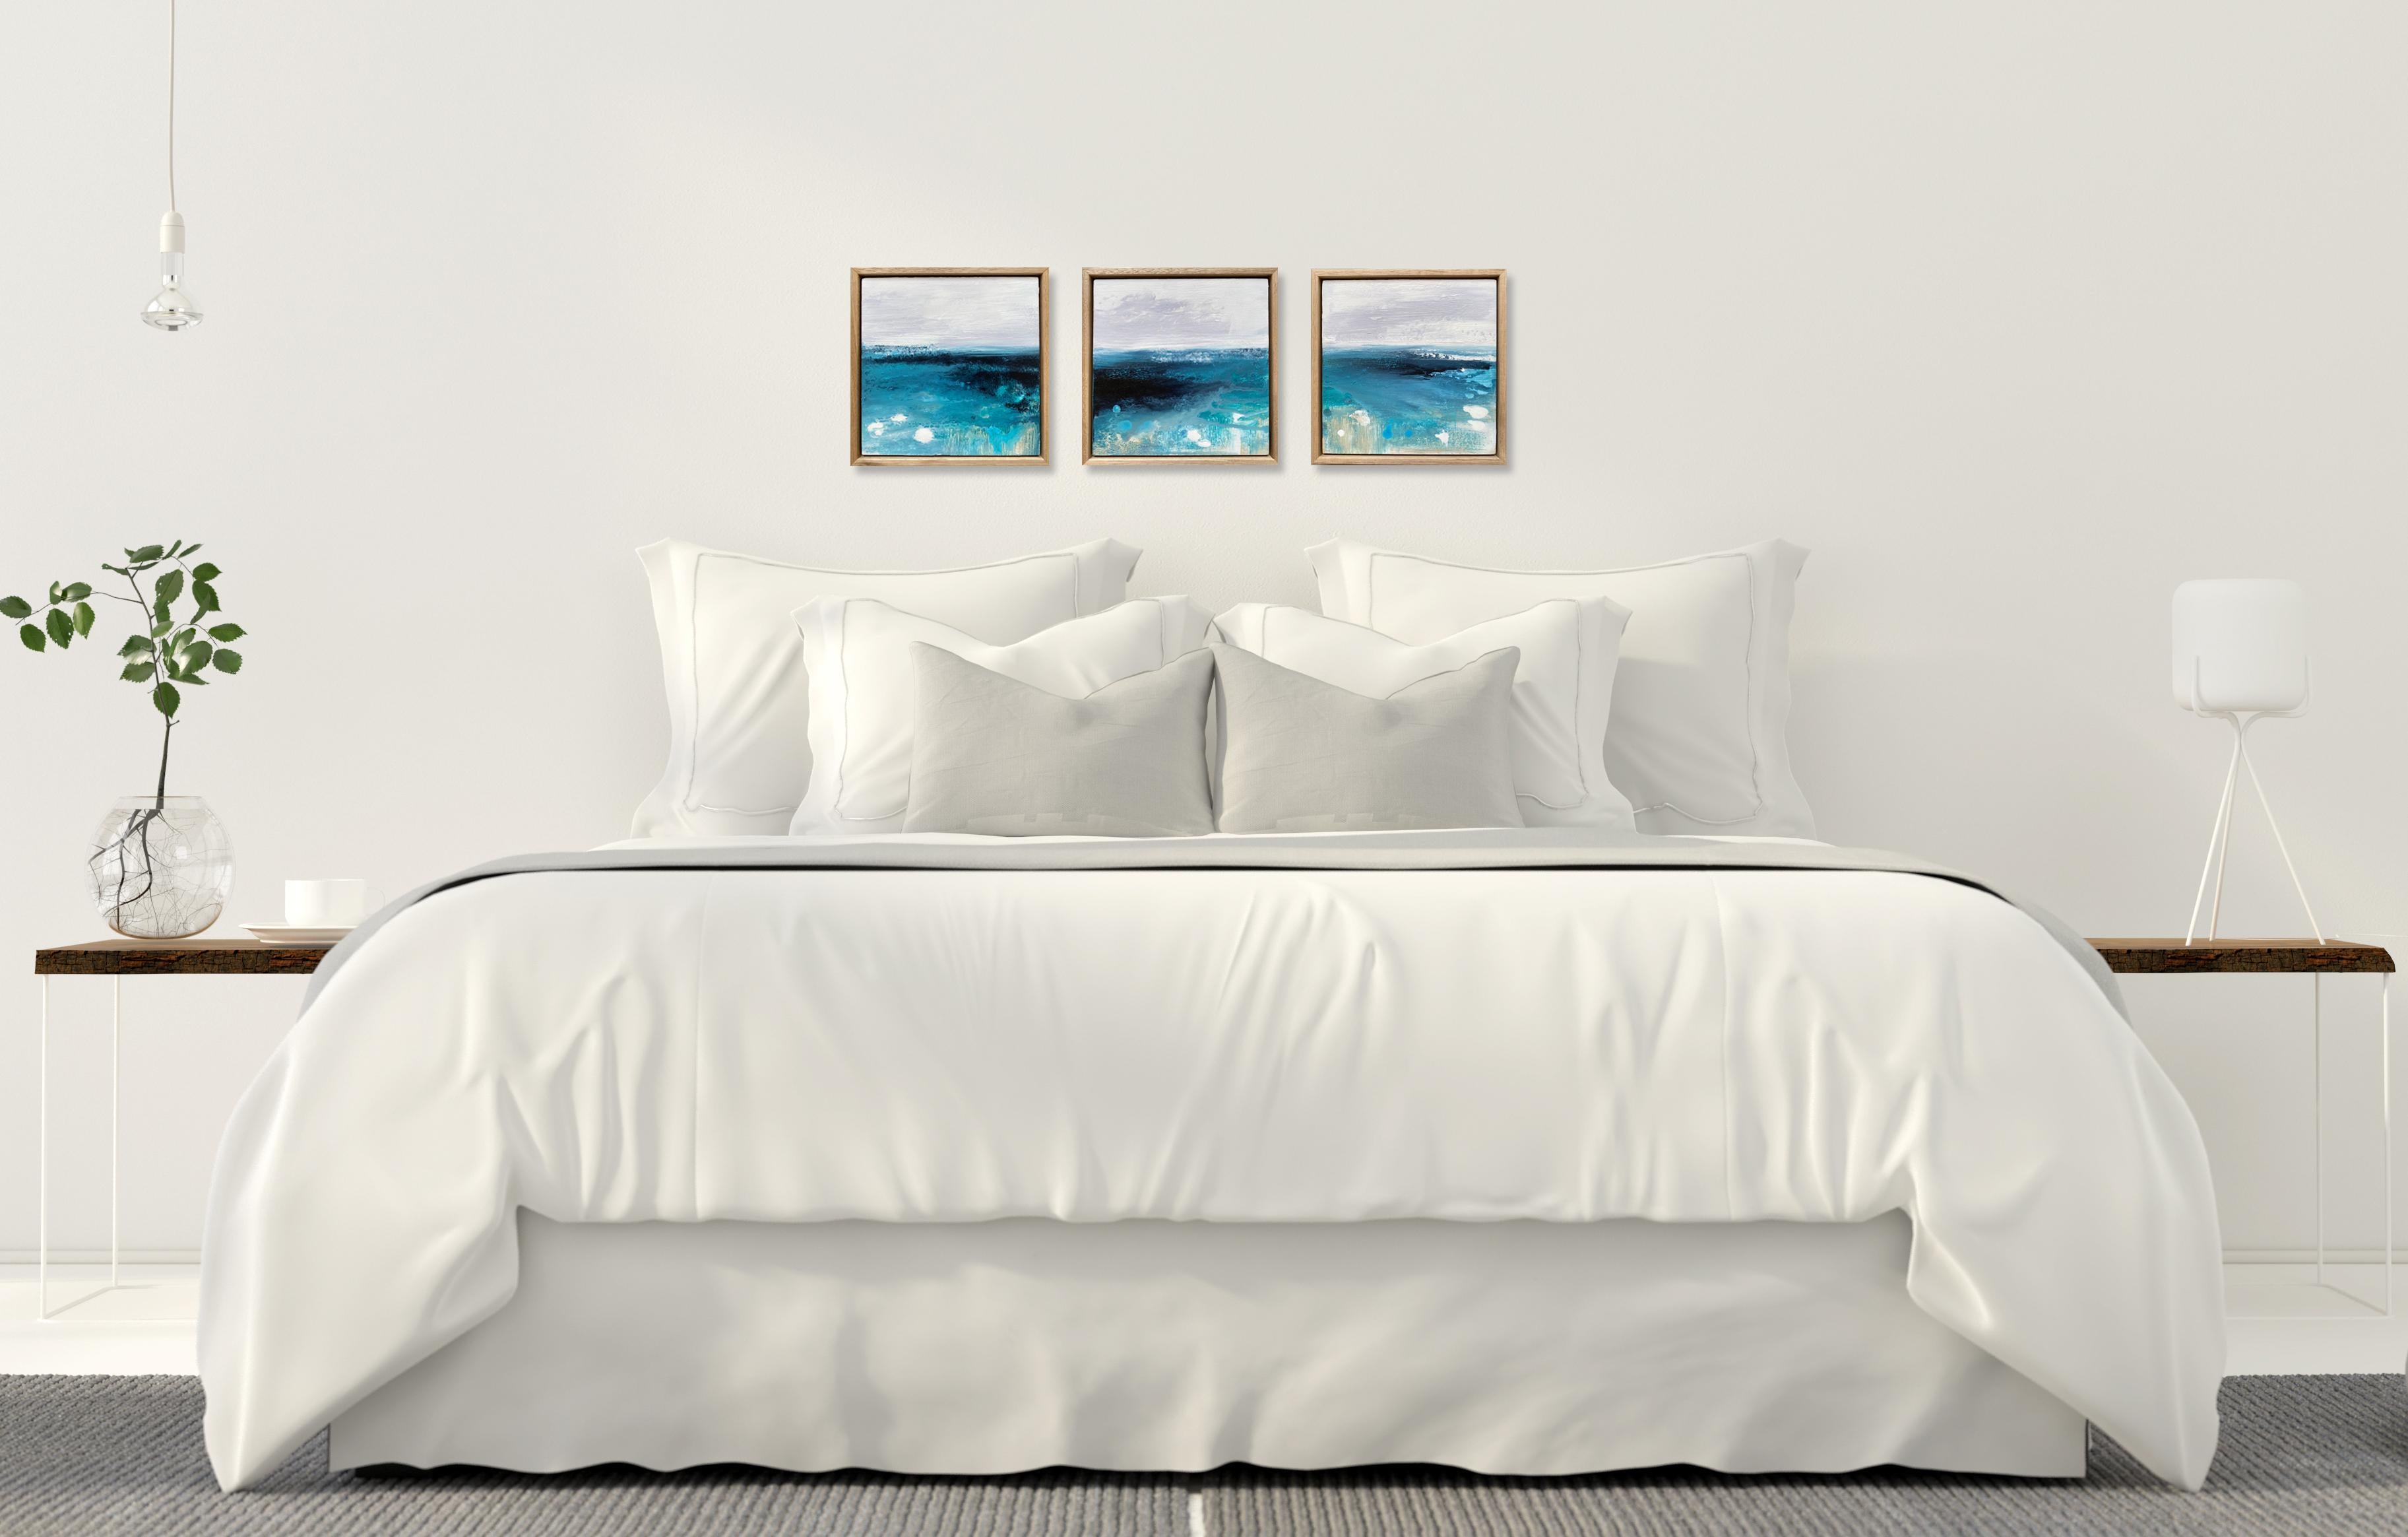 I Can Sea no2 framed abstract impressionist painting water ocean blue white grey For Sale 1